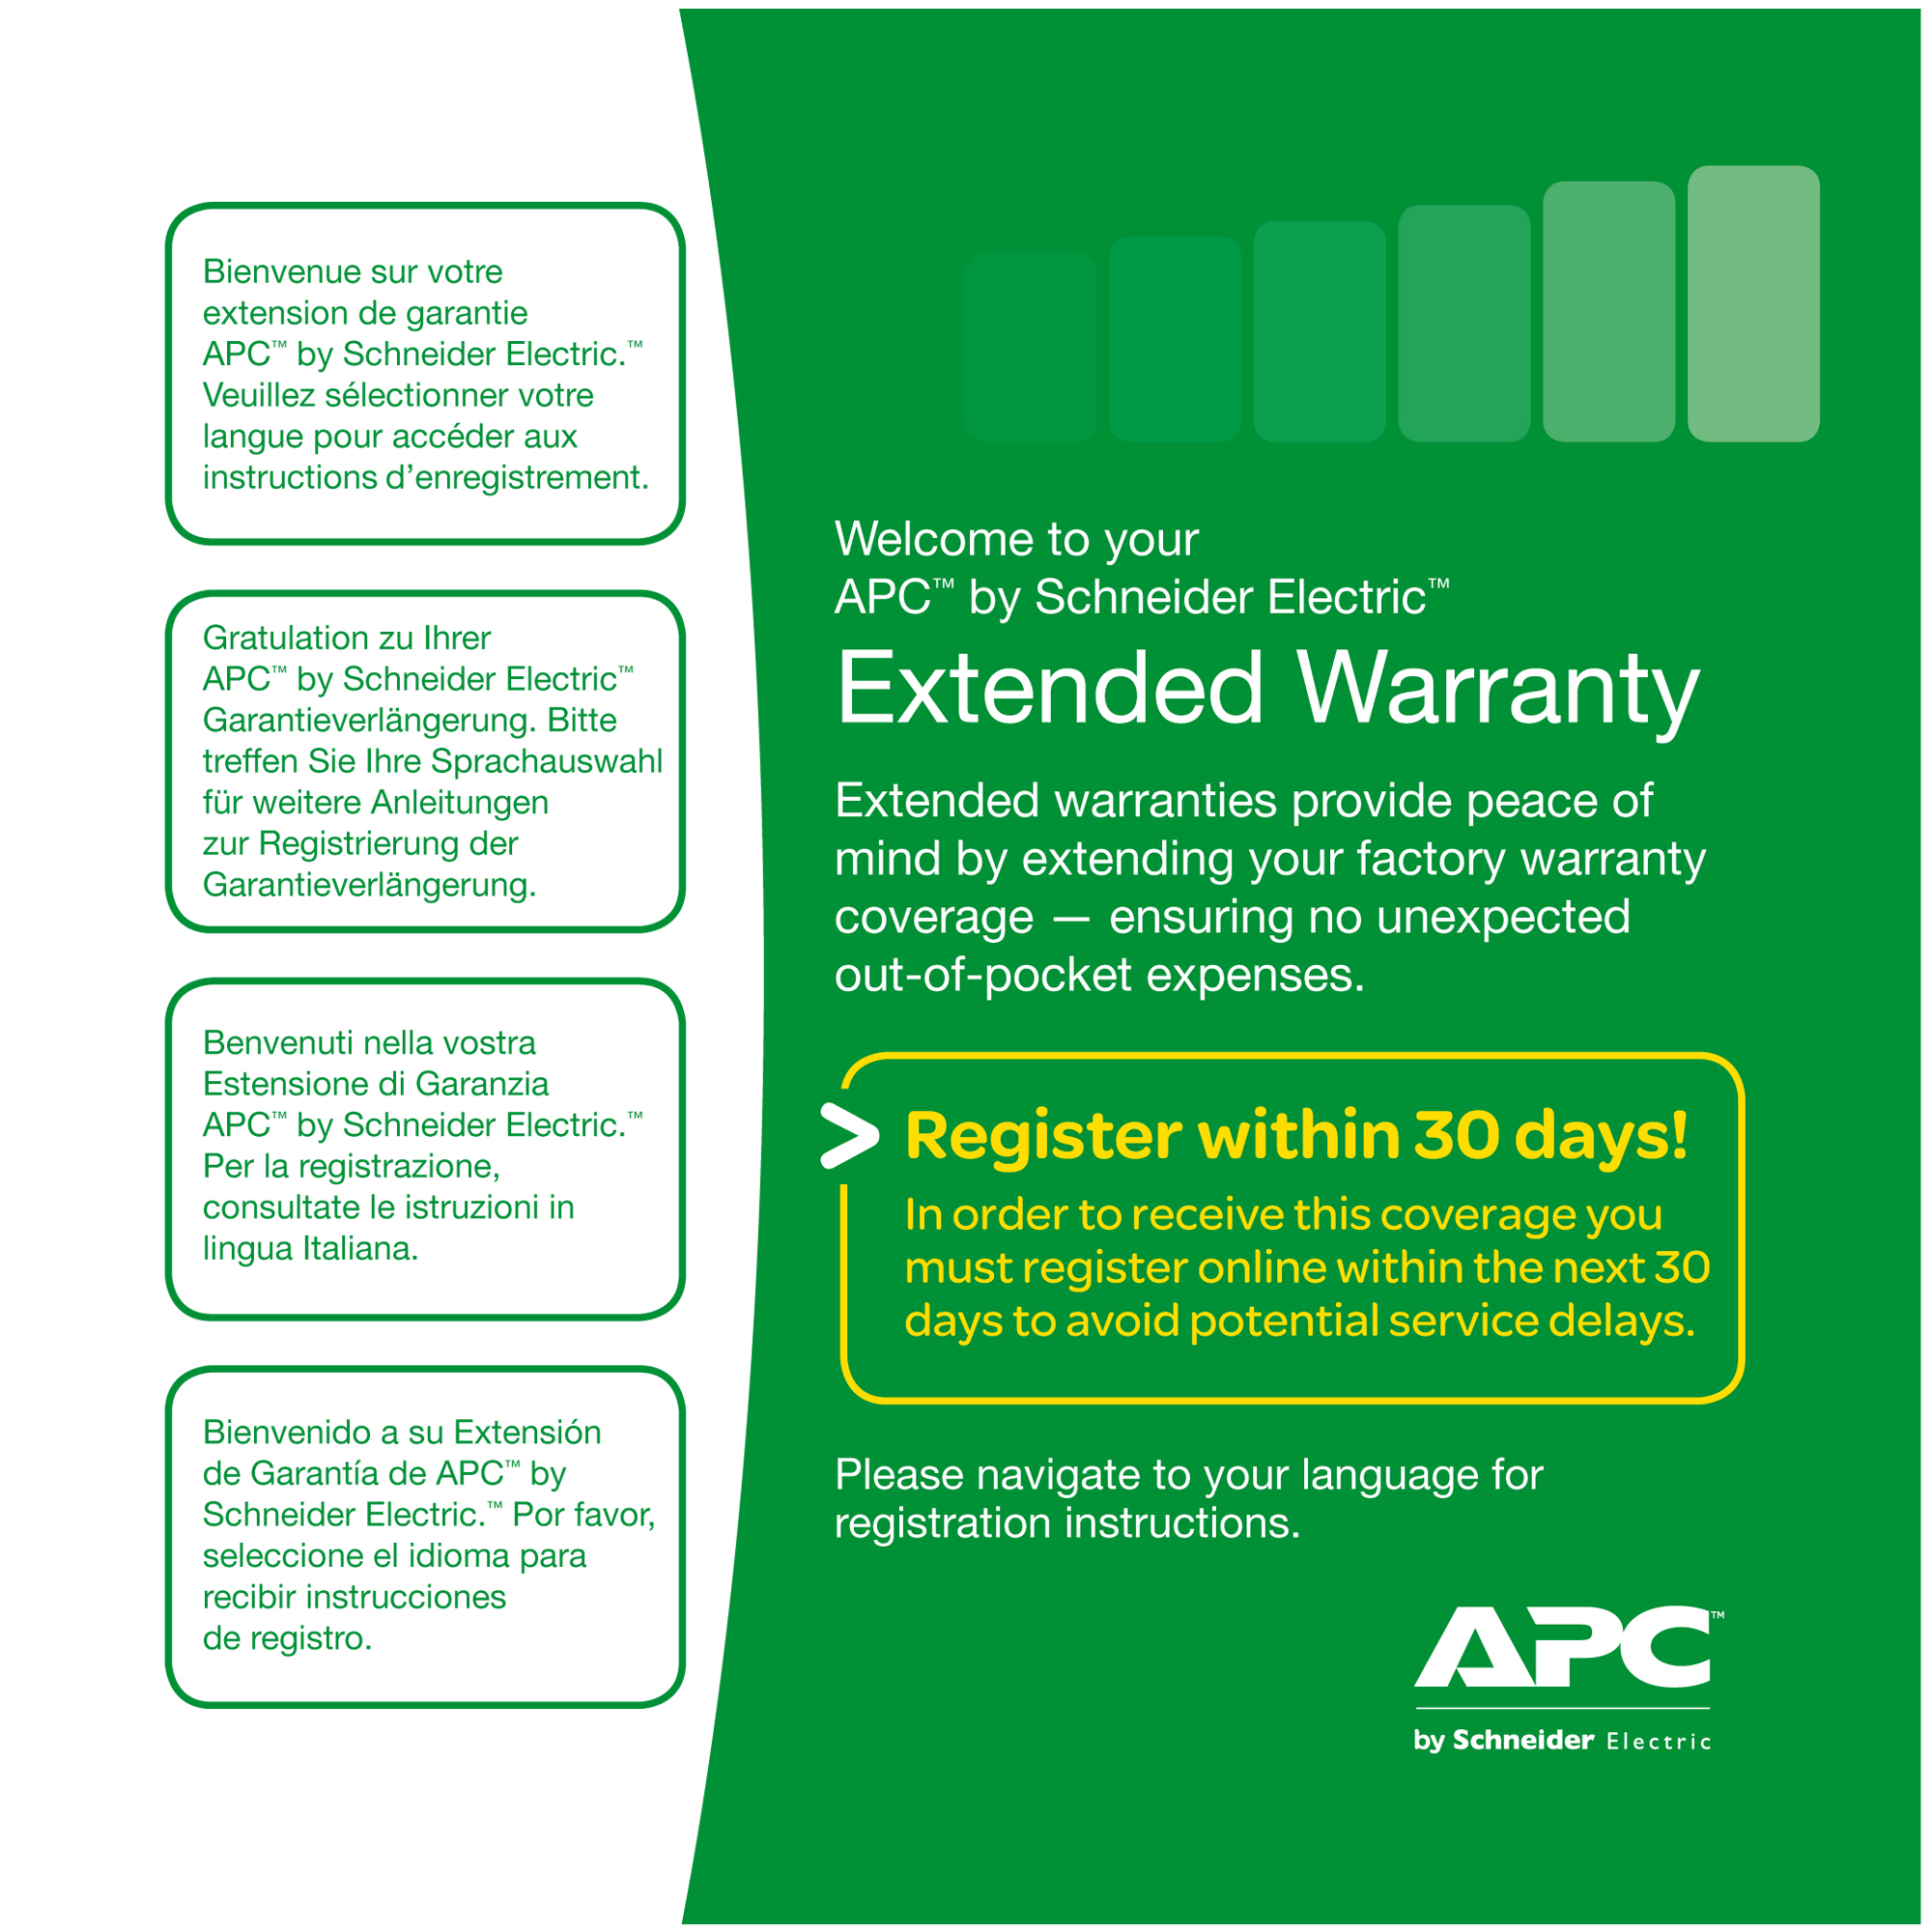 APC Extended Warranty (Renewal or High Volume)